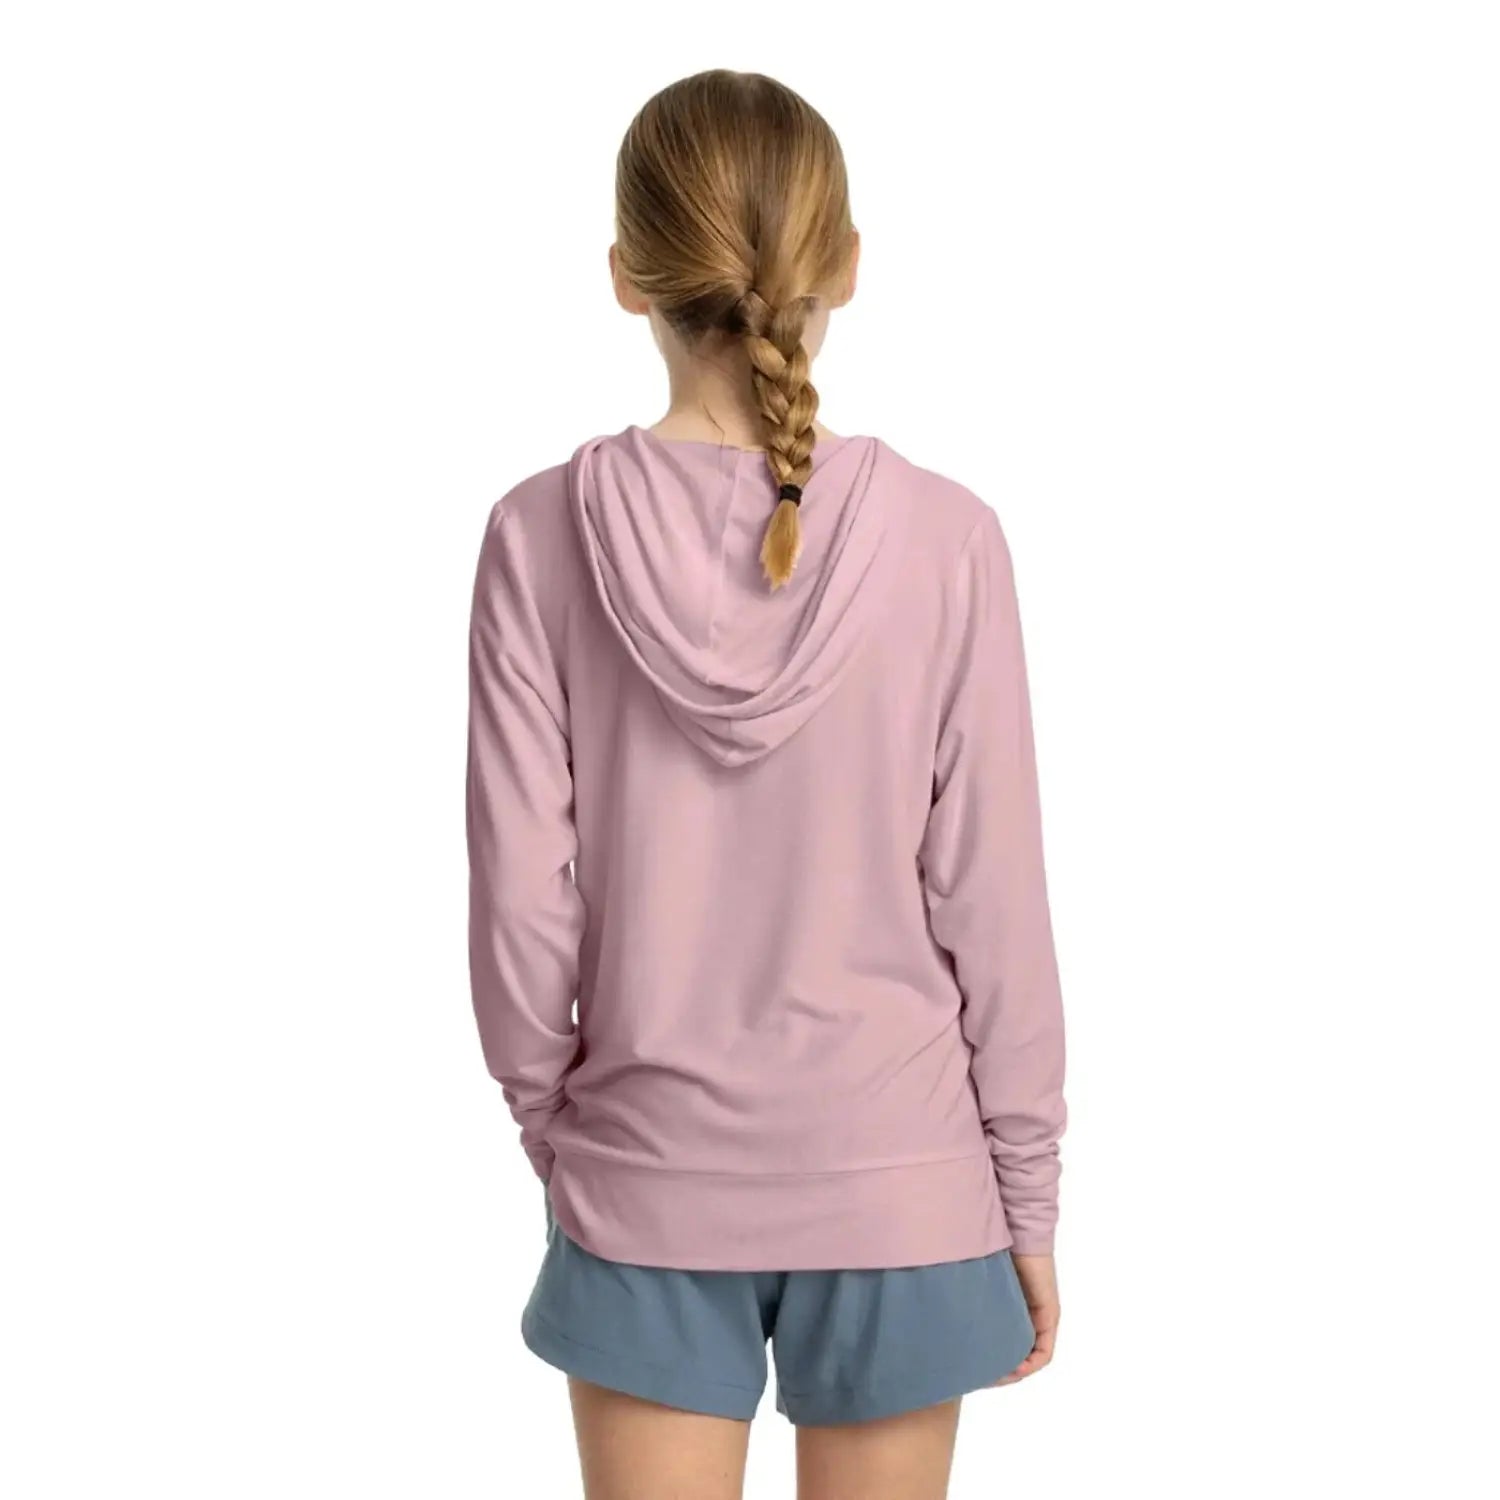 Free Fly K's Bamboo Shade Hoodie, Lilac, back view on model 